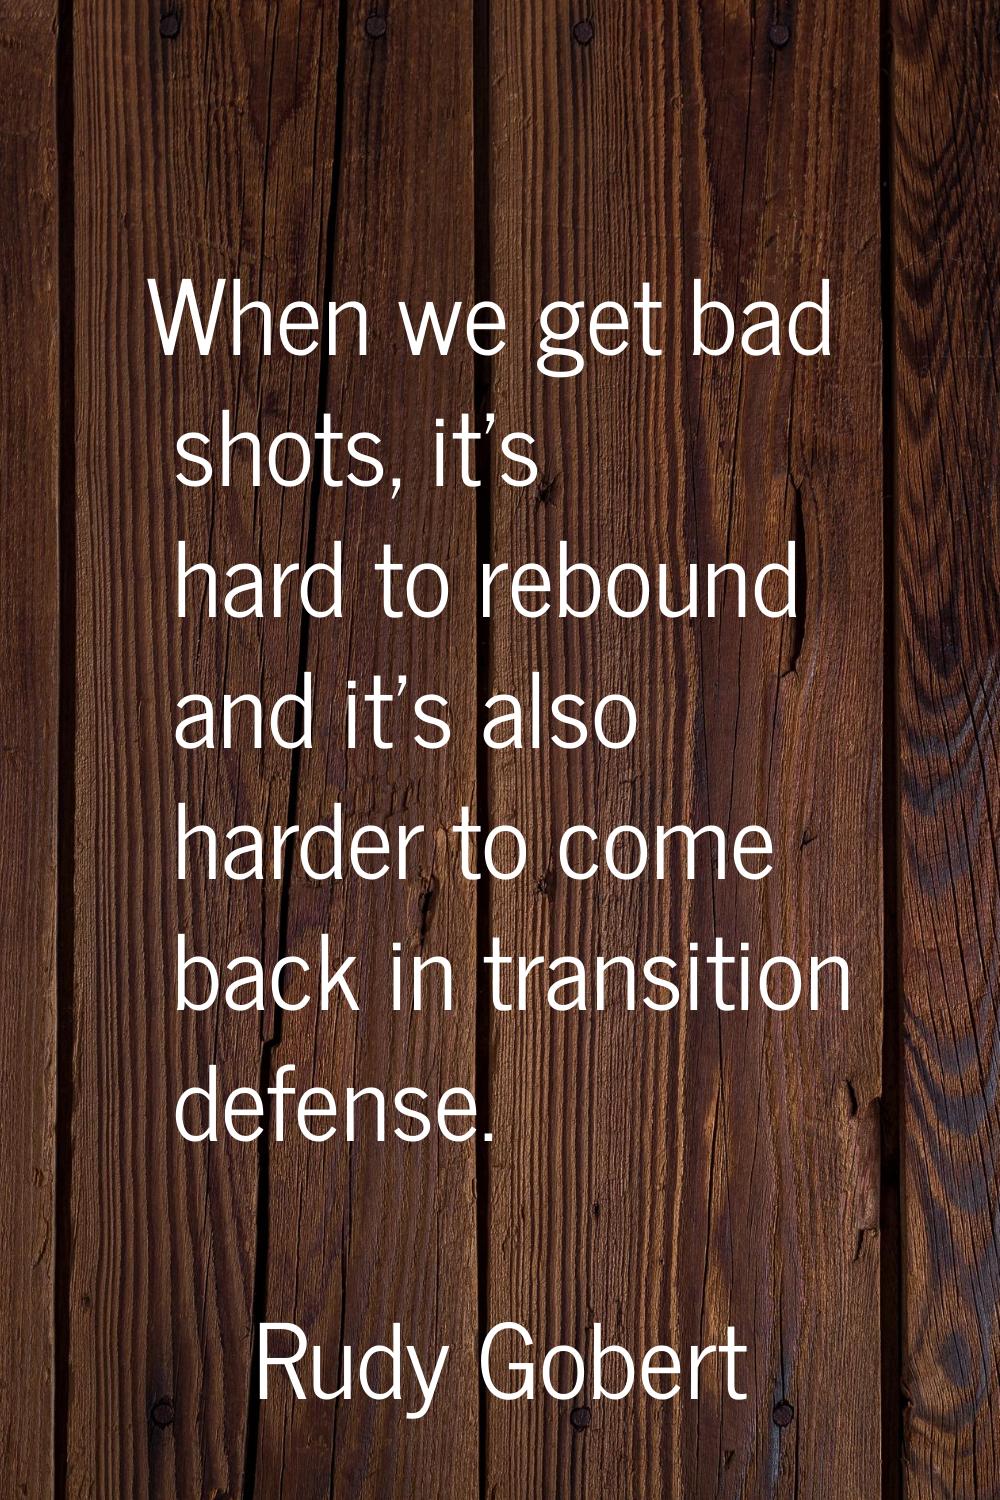 When we get bad shots, it's hard to rebound and it's also harder to come back in transition defense